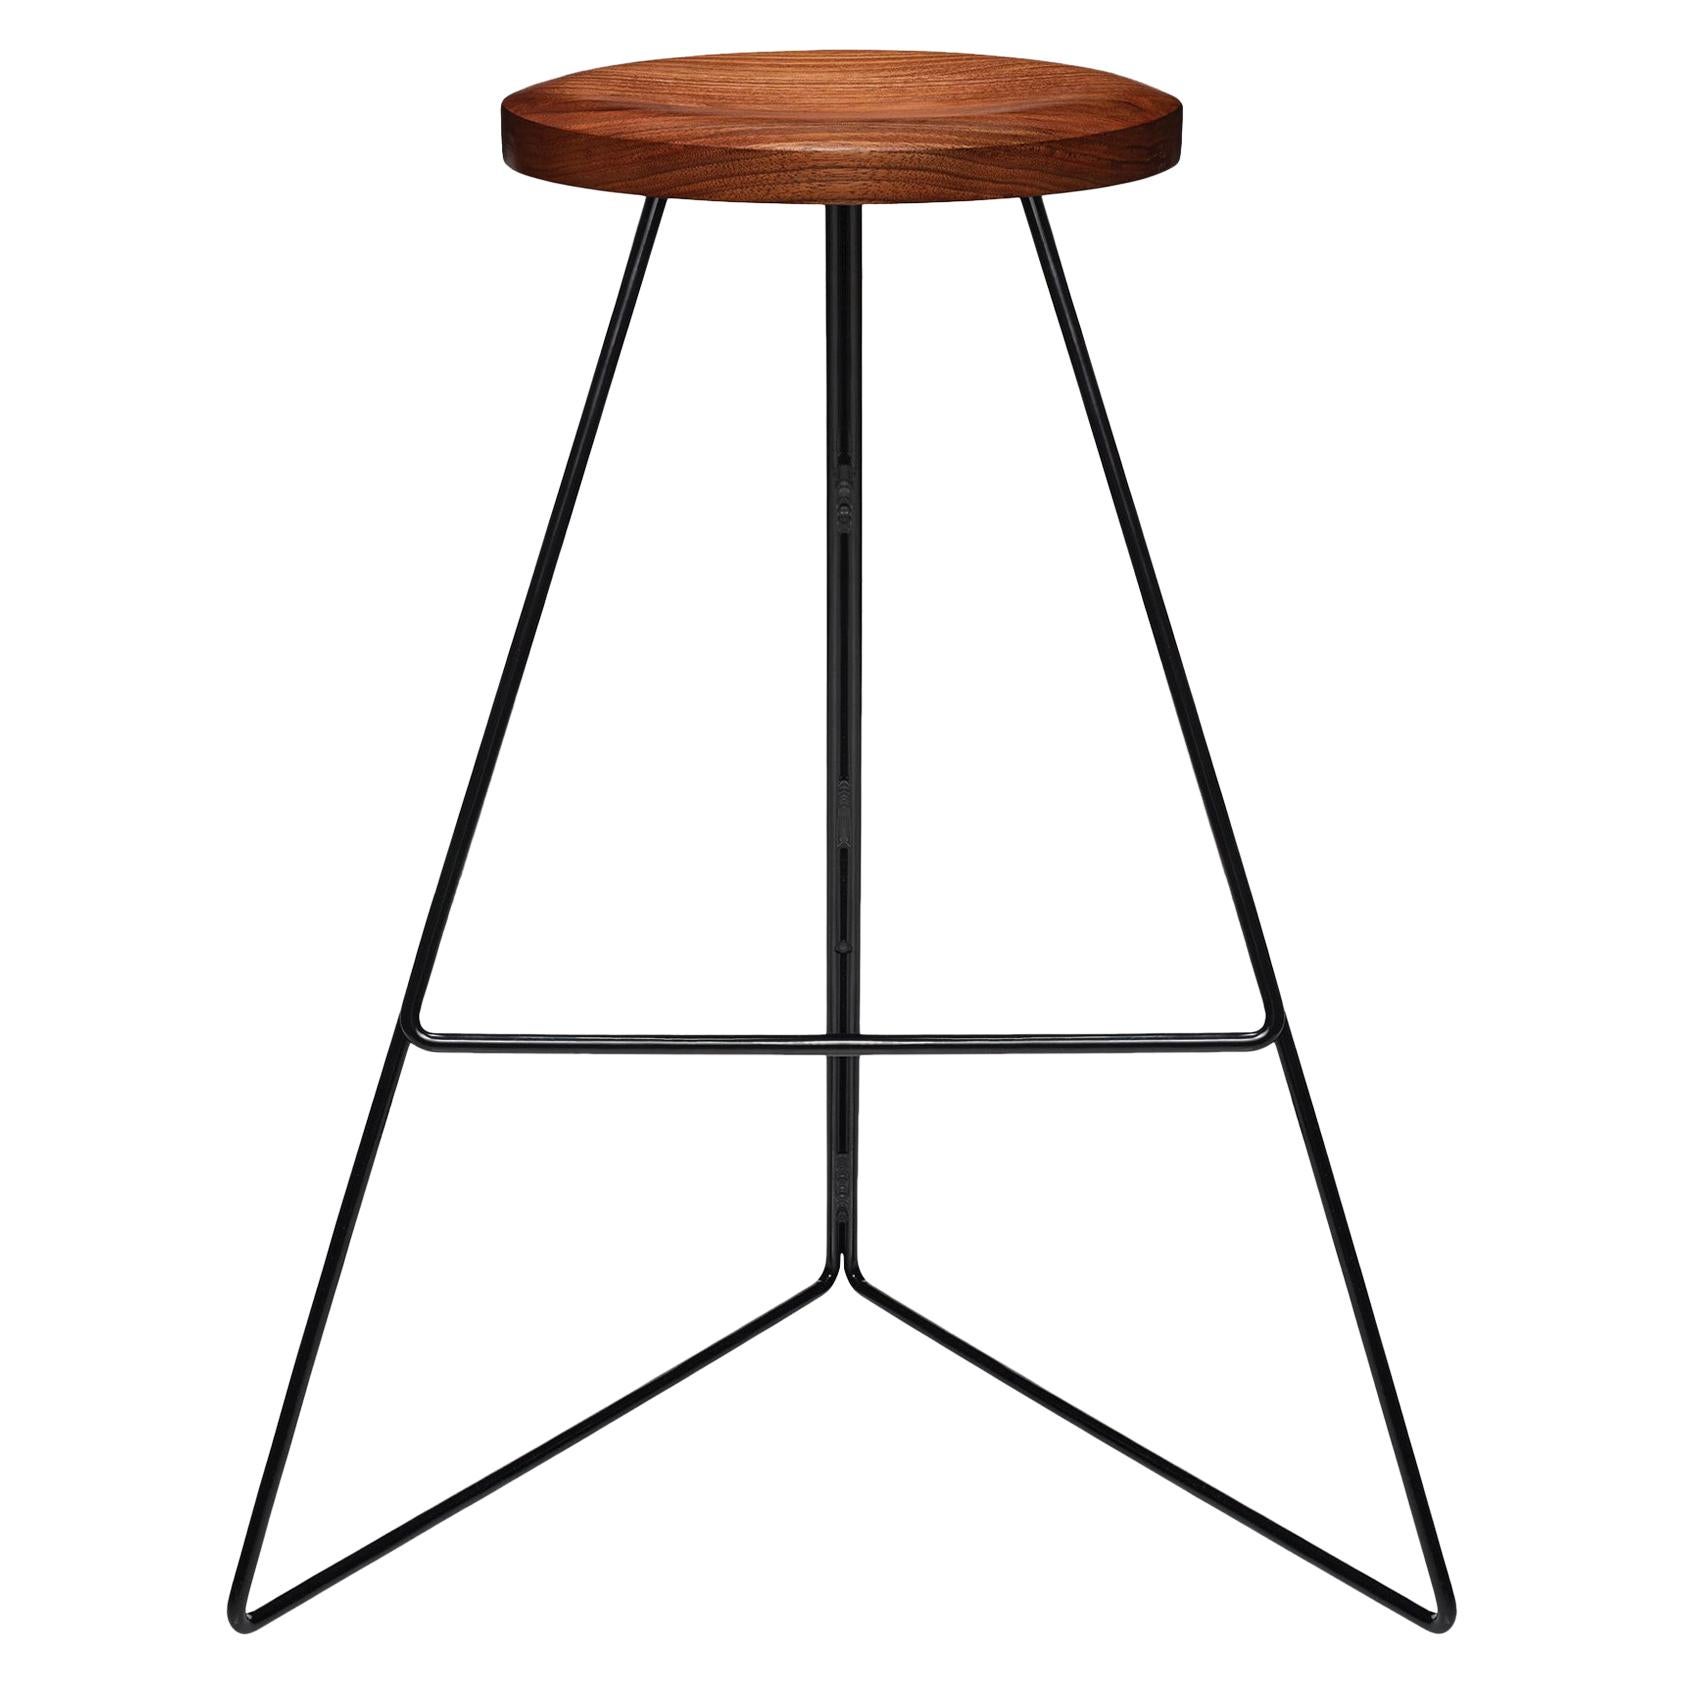 The Coleman Stool, Black Walnut and Black, Counter Height, Made in USA For Sale